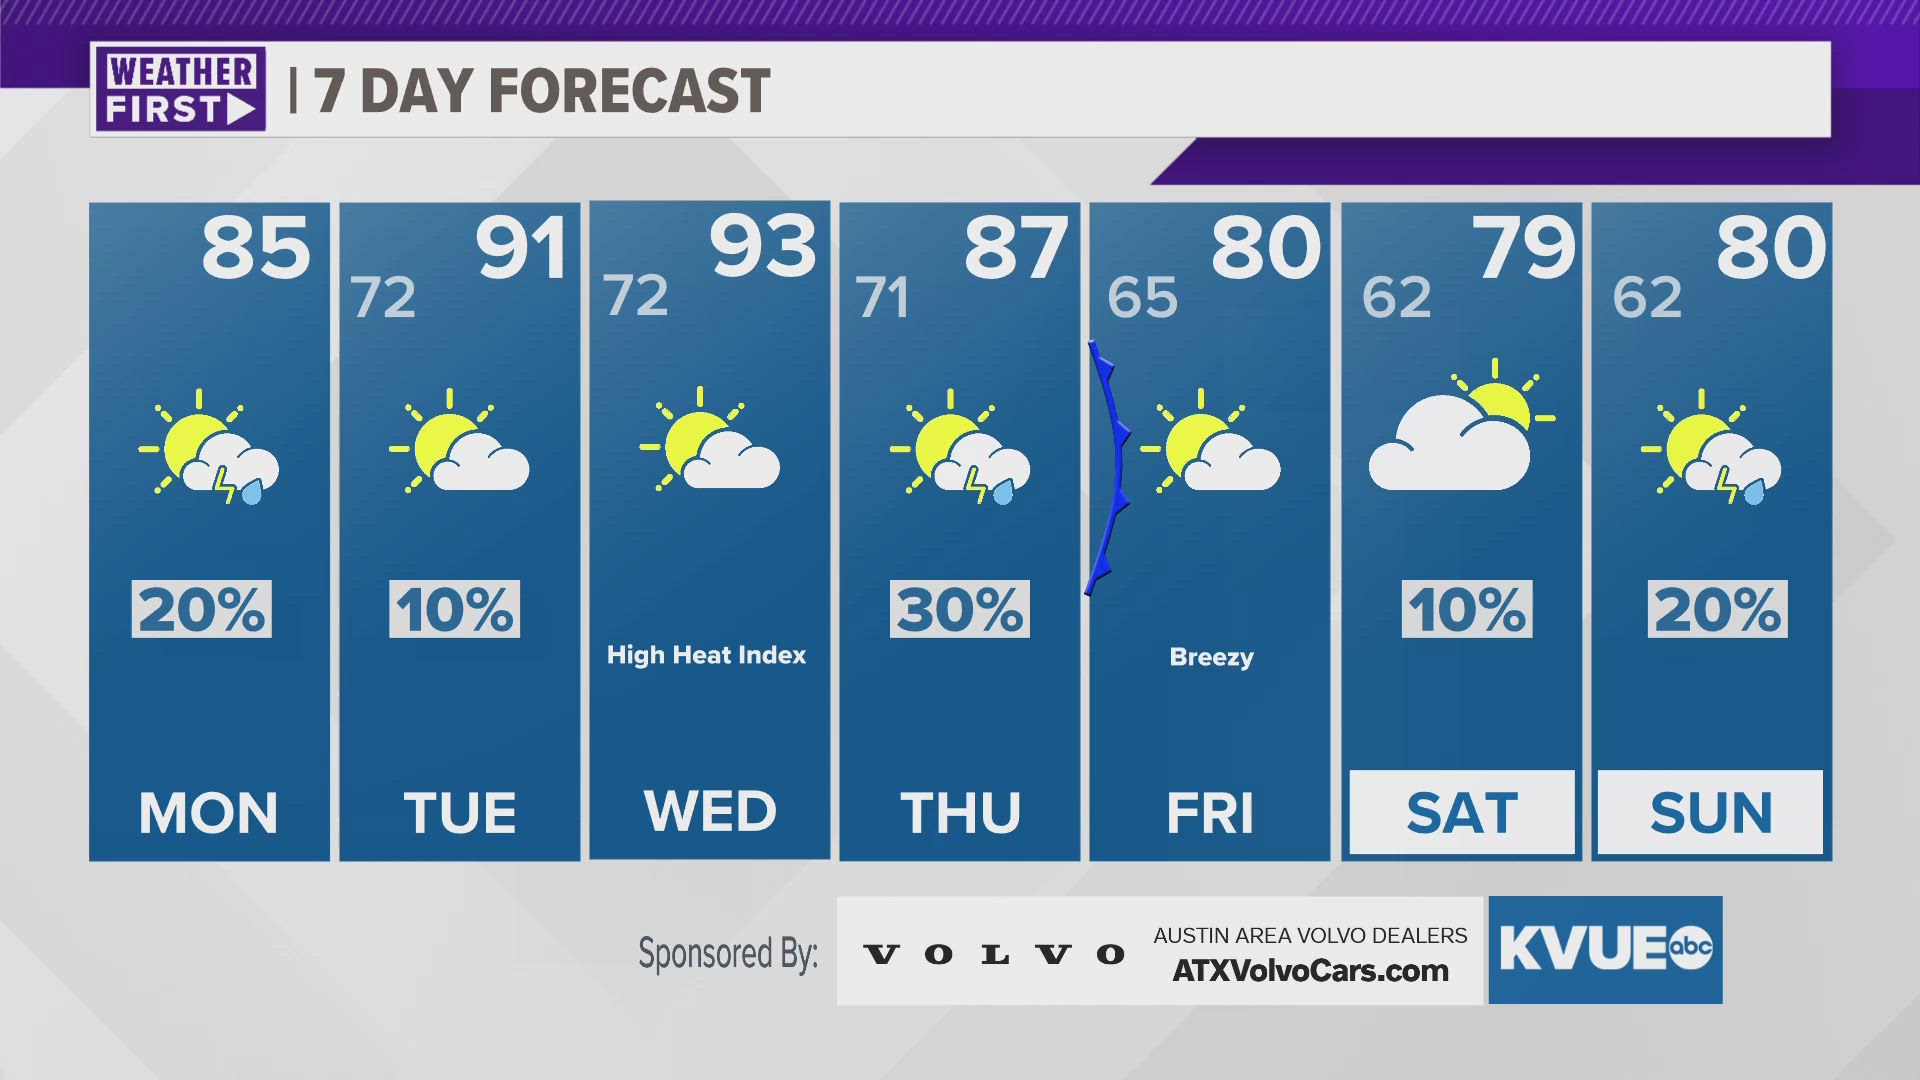 We are warming up the next few days, on and off rain chances.